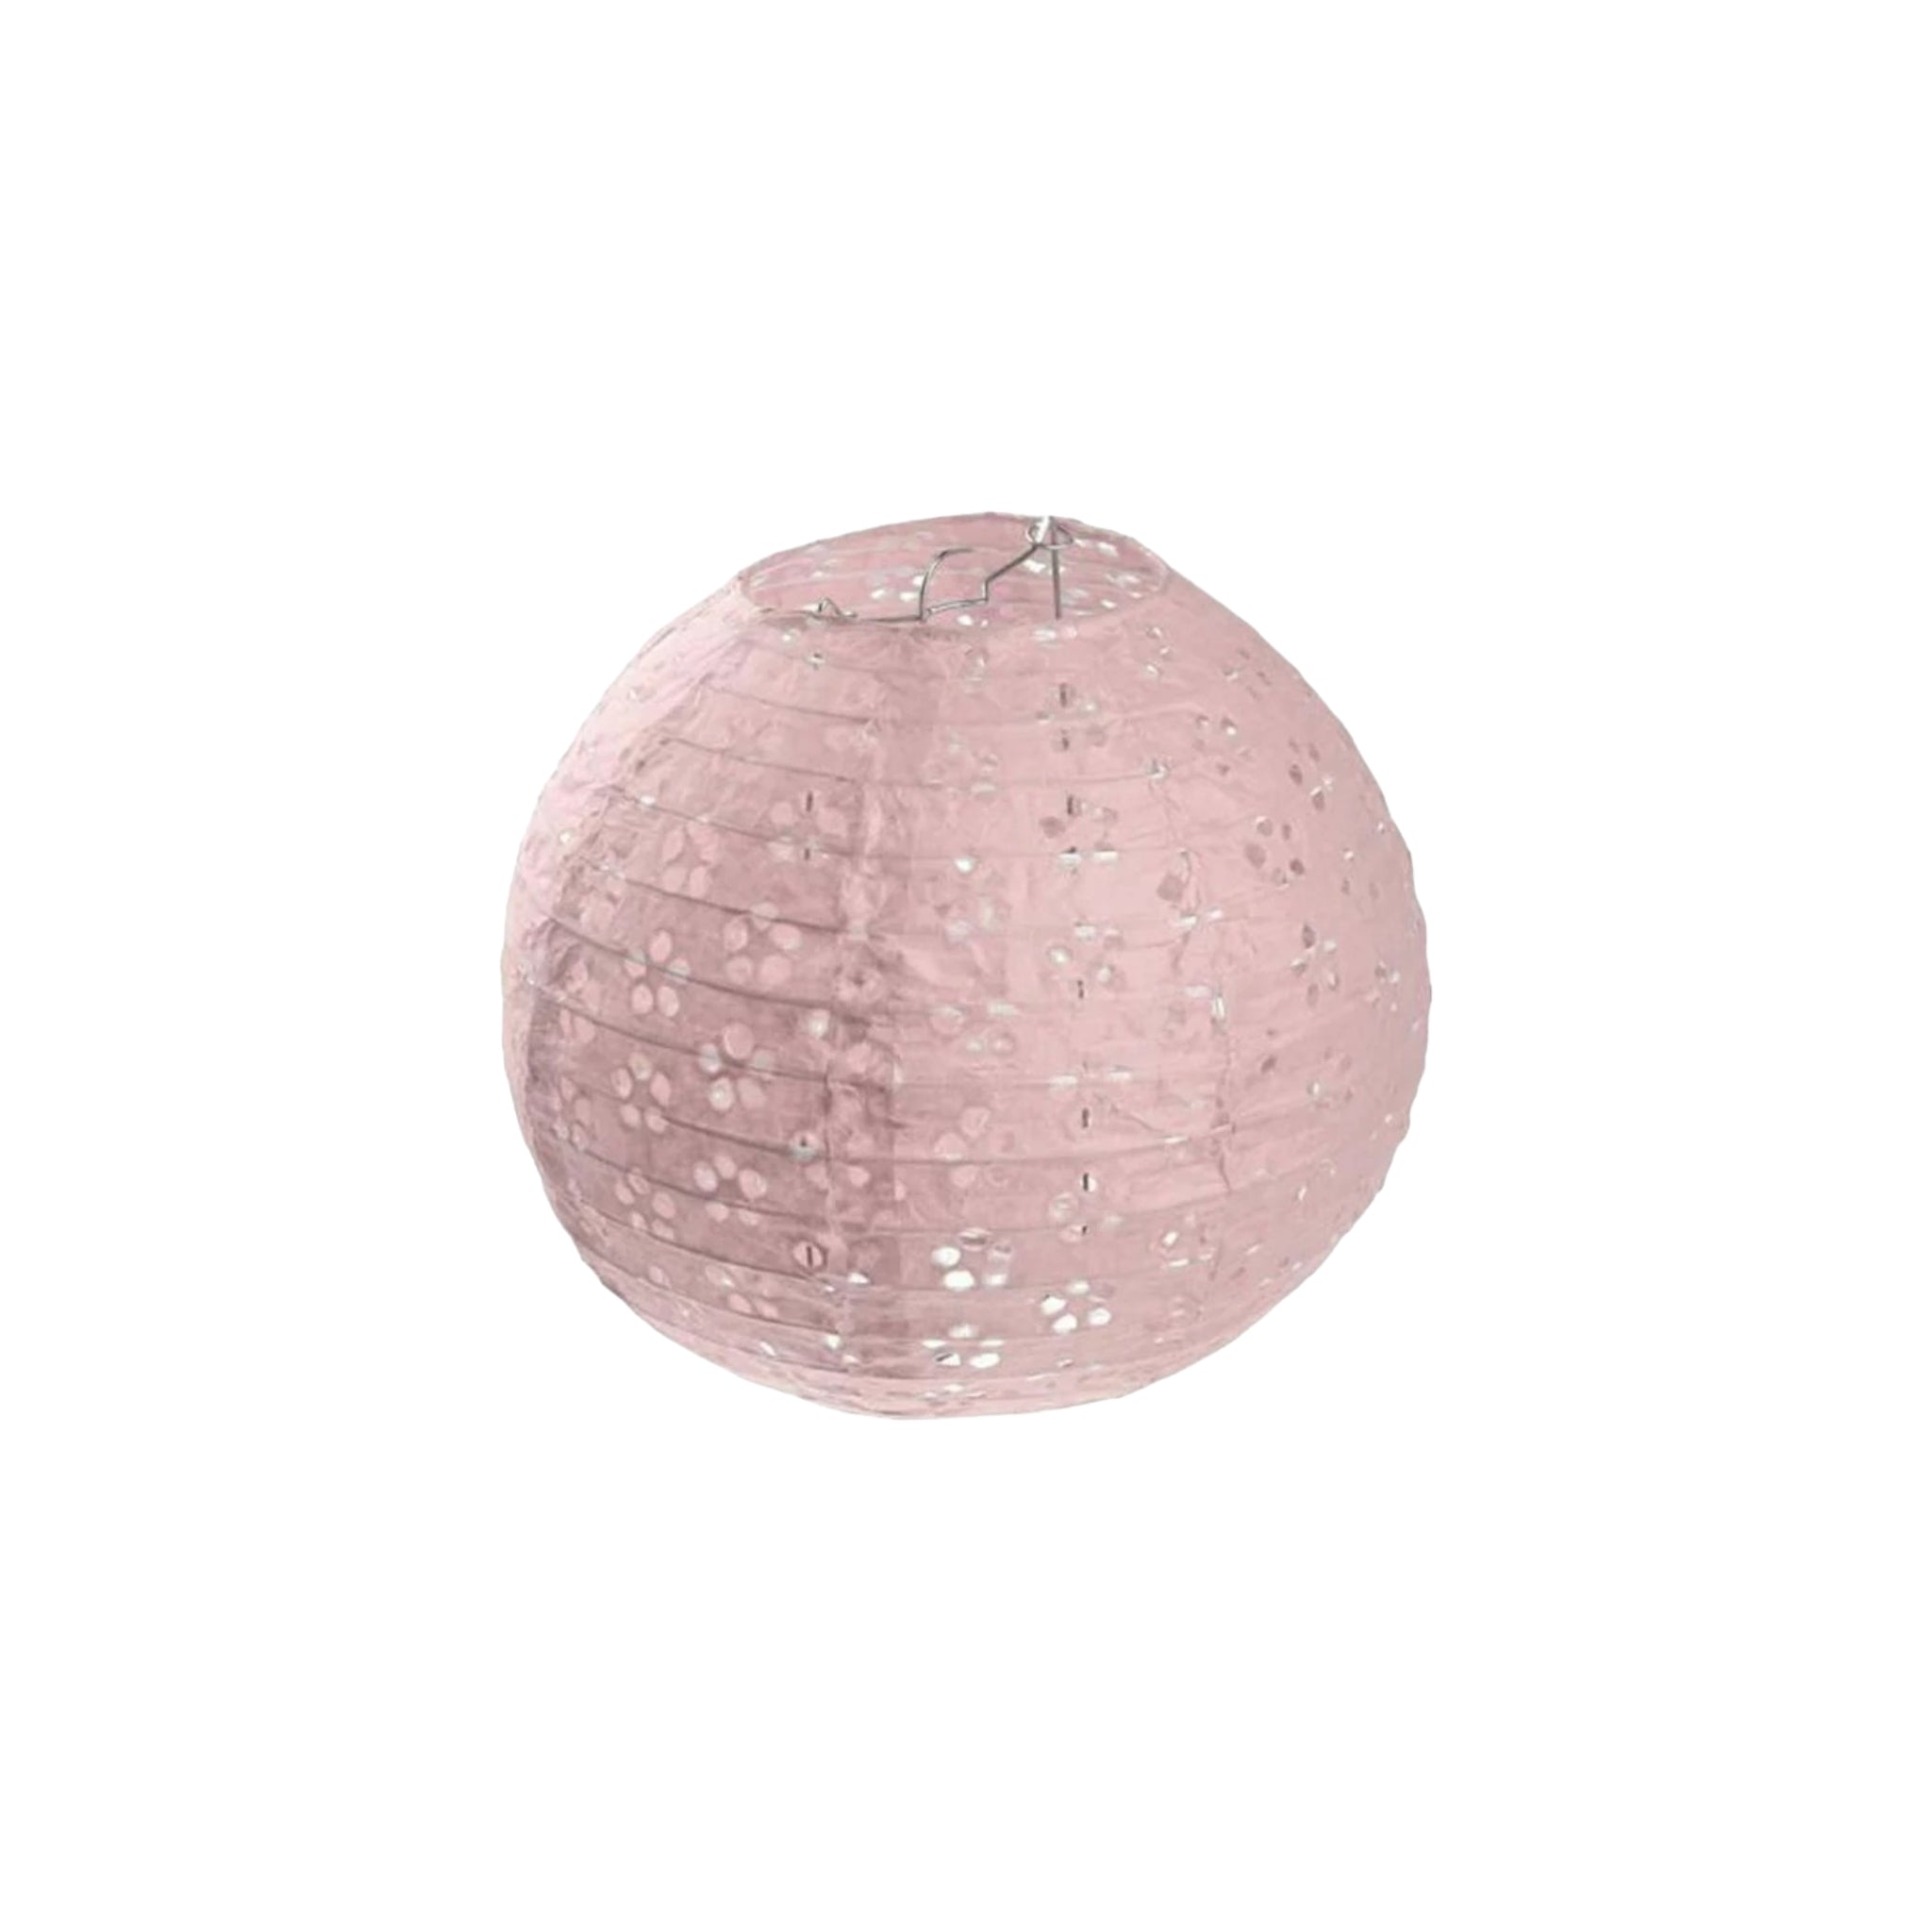 Chinese Paper Lantern 25cm with Lace Design